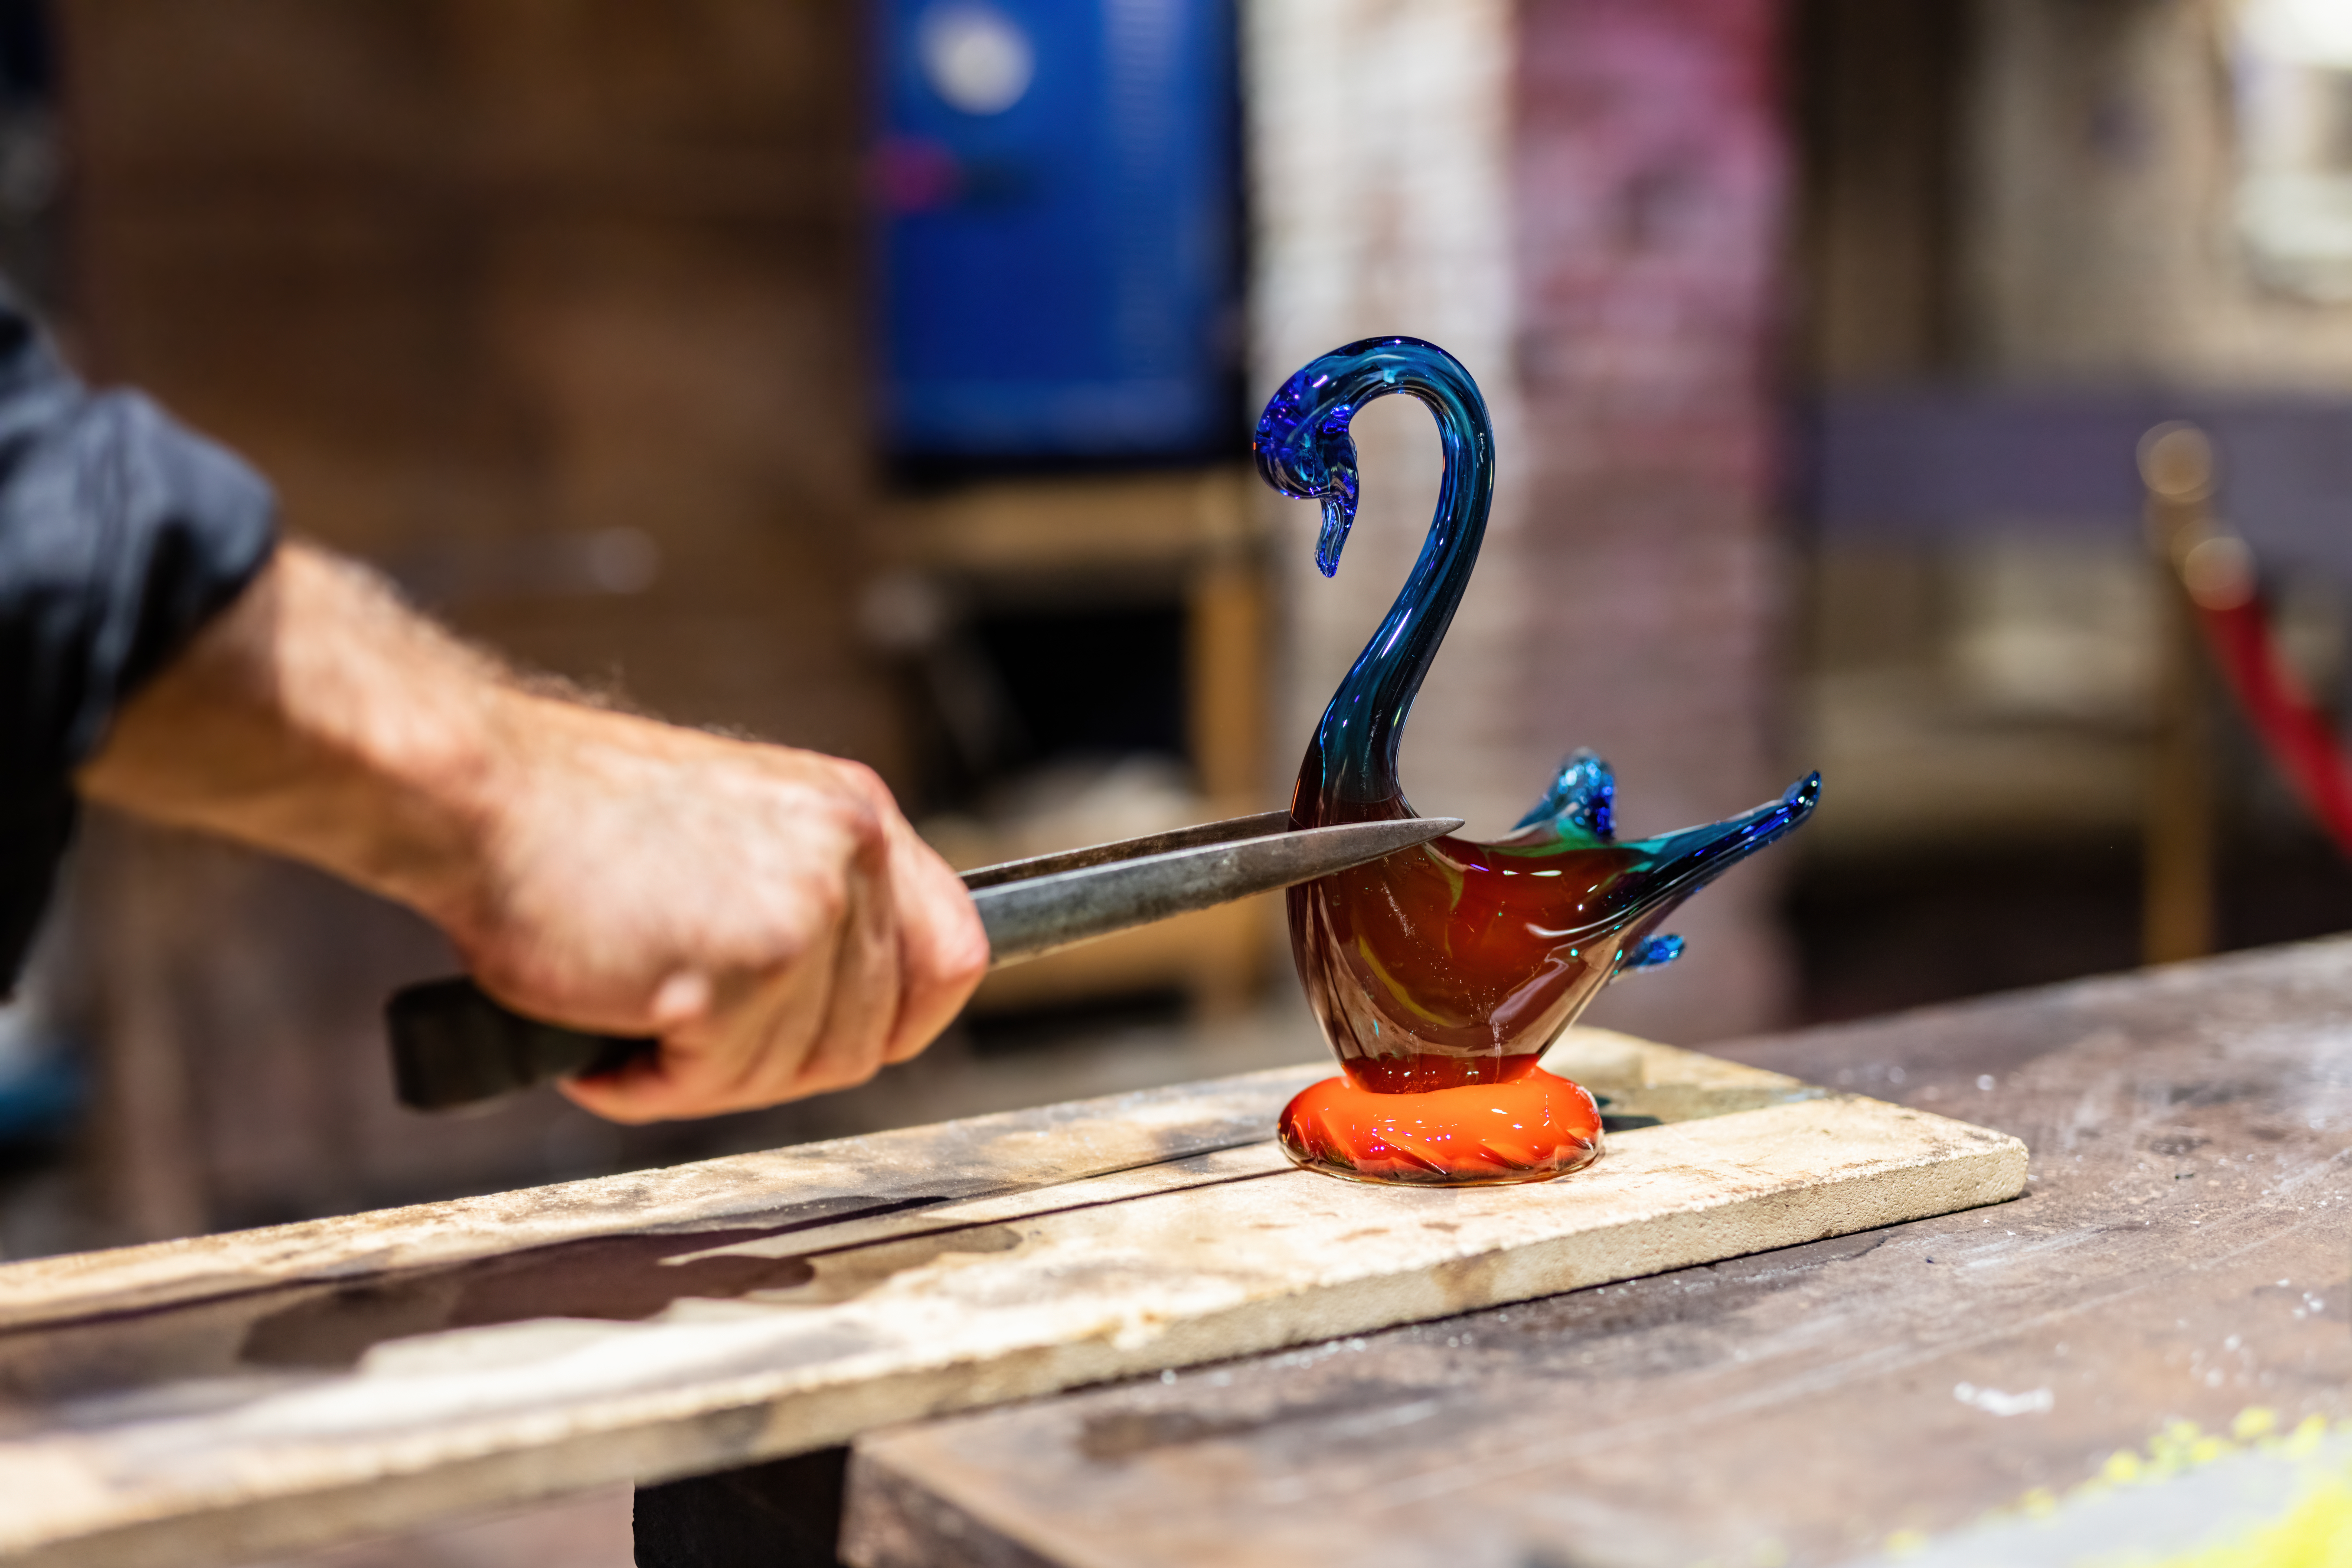 Glass blowing at Murano Venice